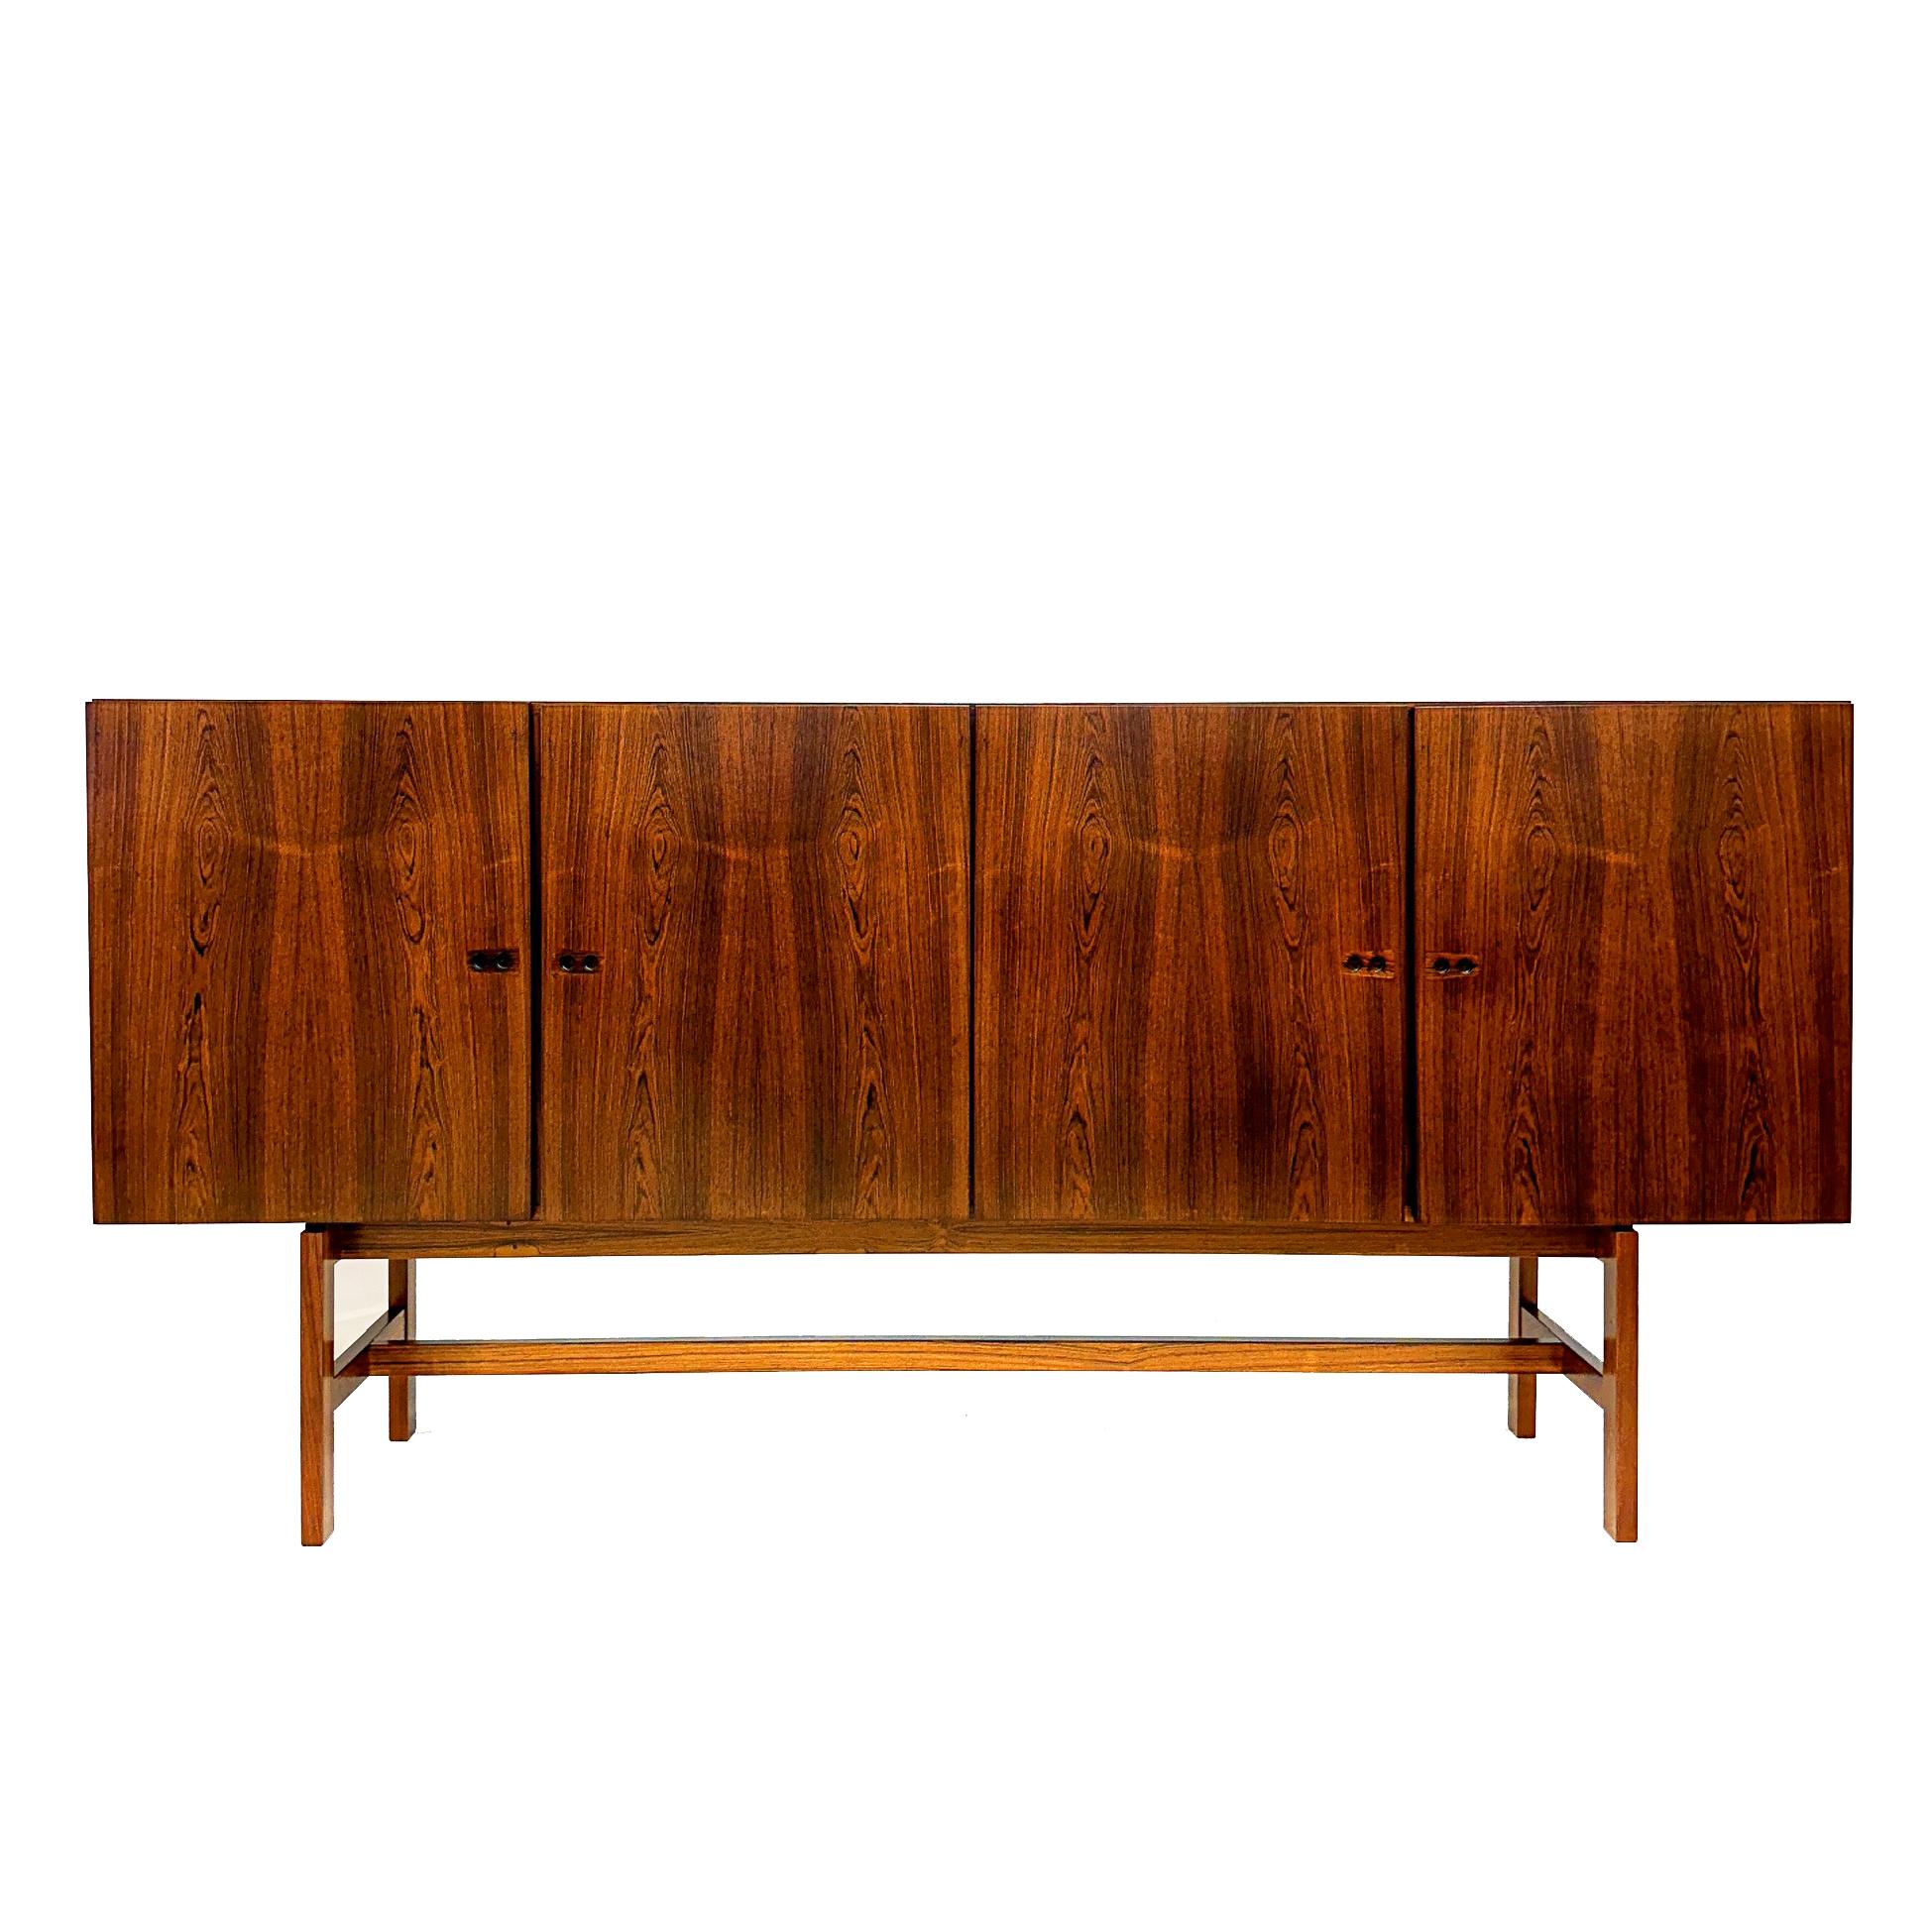 Mid-Century Brazilian Rosewood sideboard with four doors. Nice detailed handles. Adjustable shelves inside.  Three silverware drawers, and a bar with mirror and two drawers.  Light automatically turns on when left door open, to reveal the bar.
Often